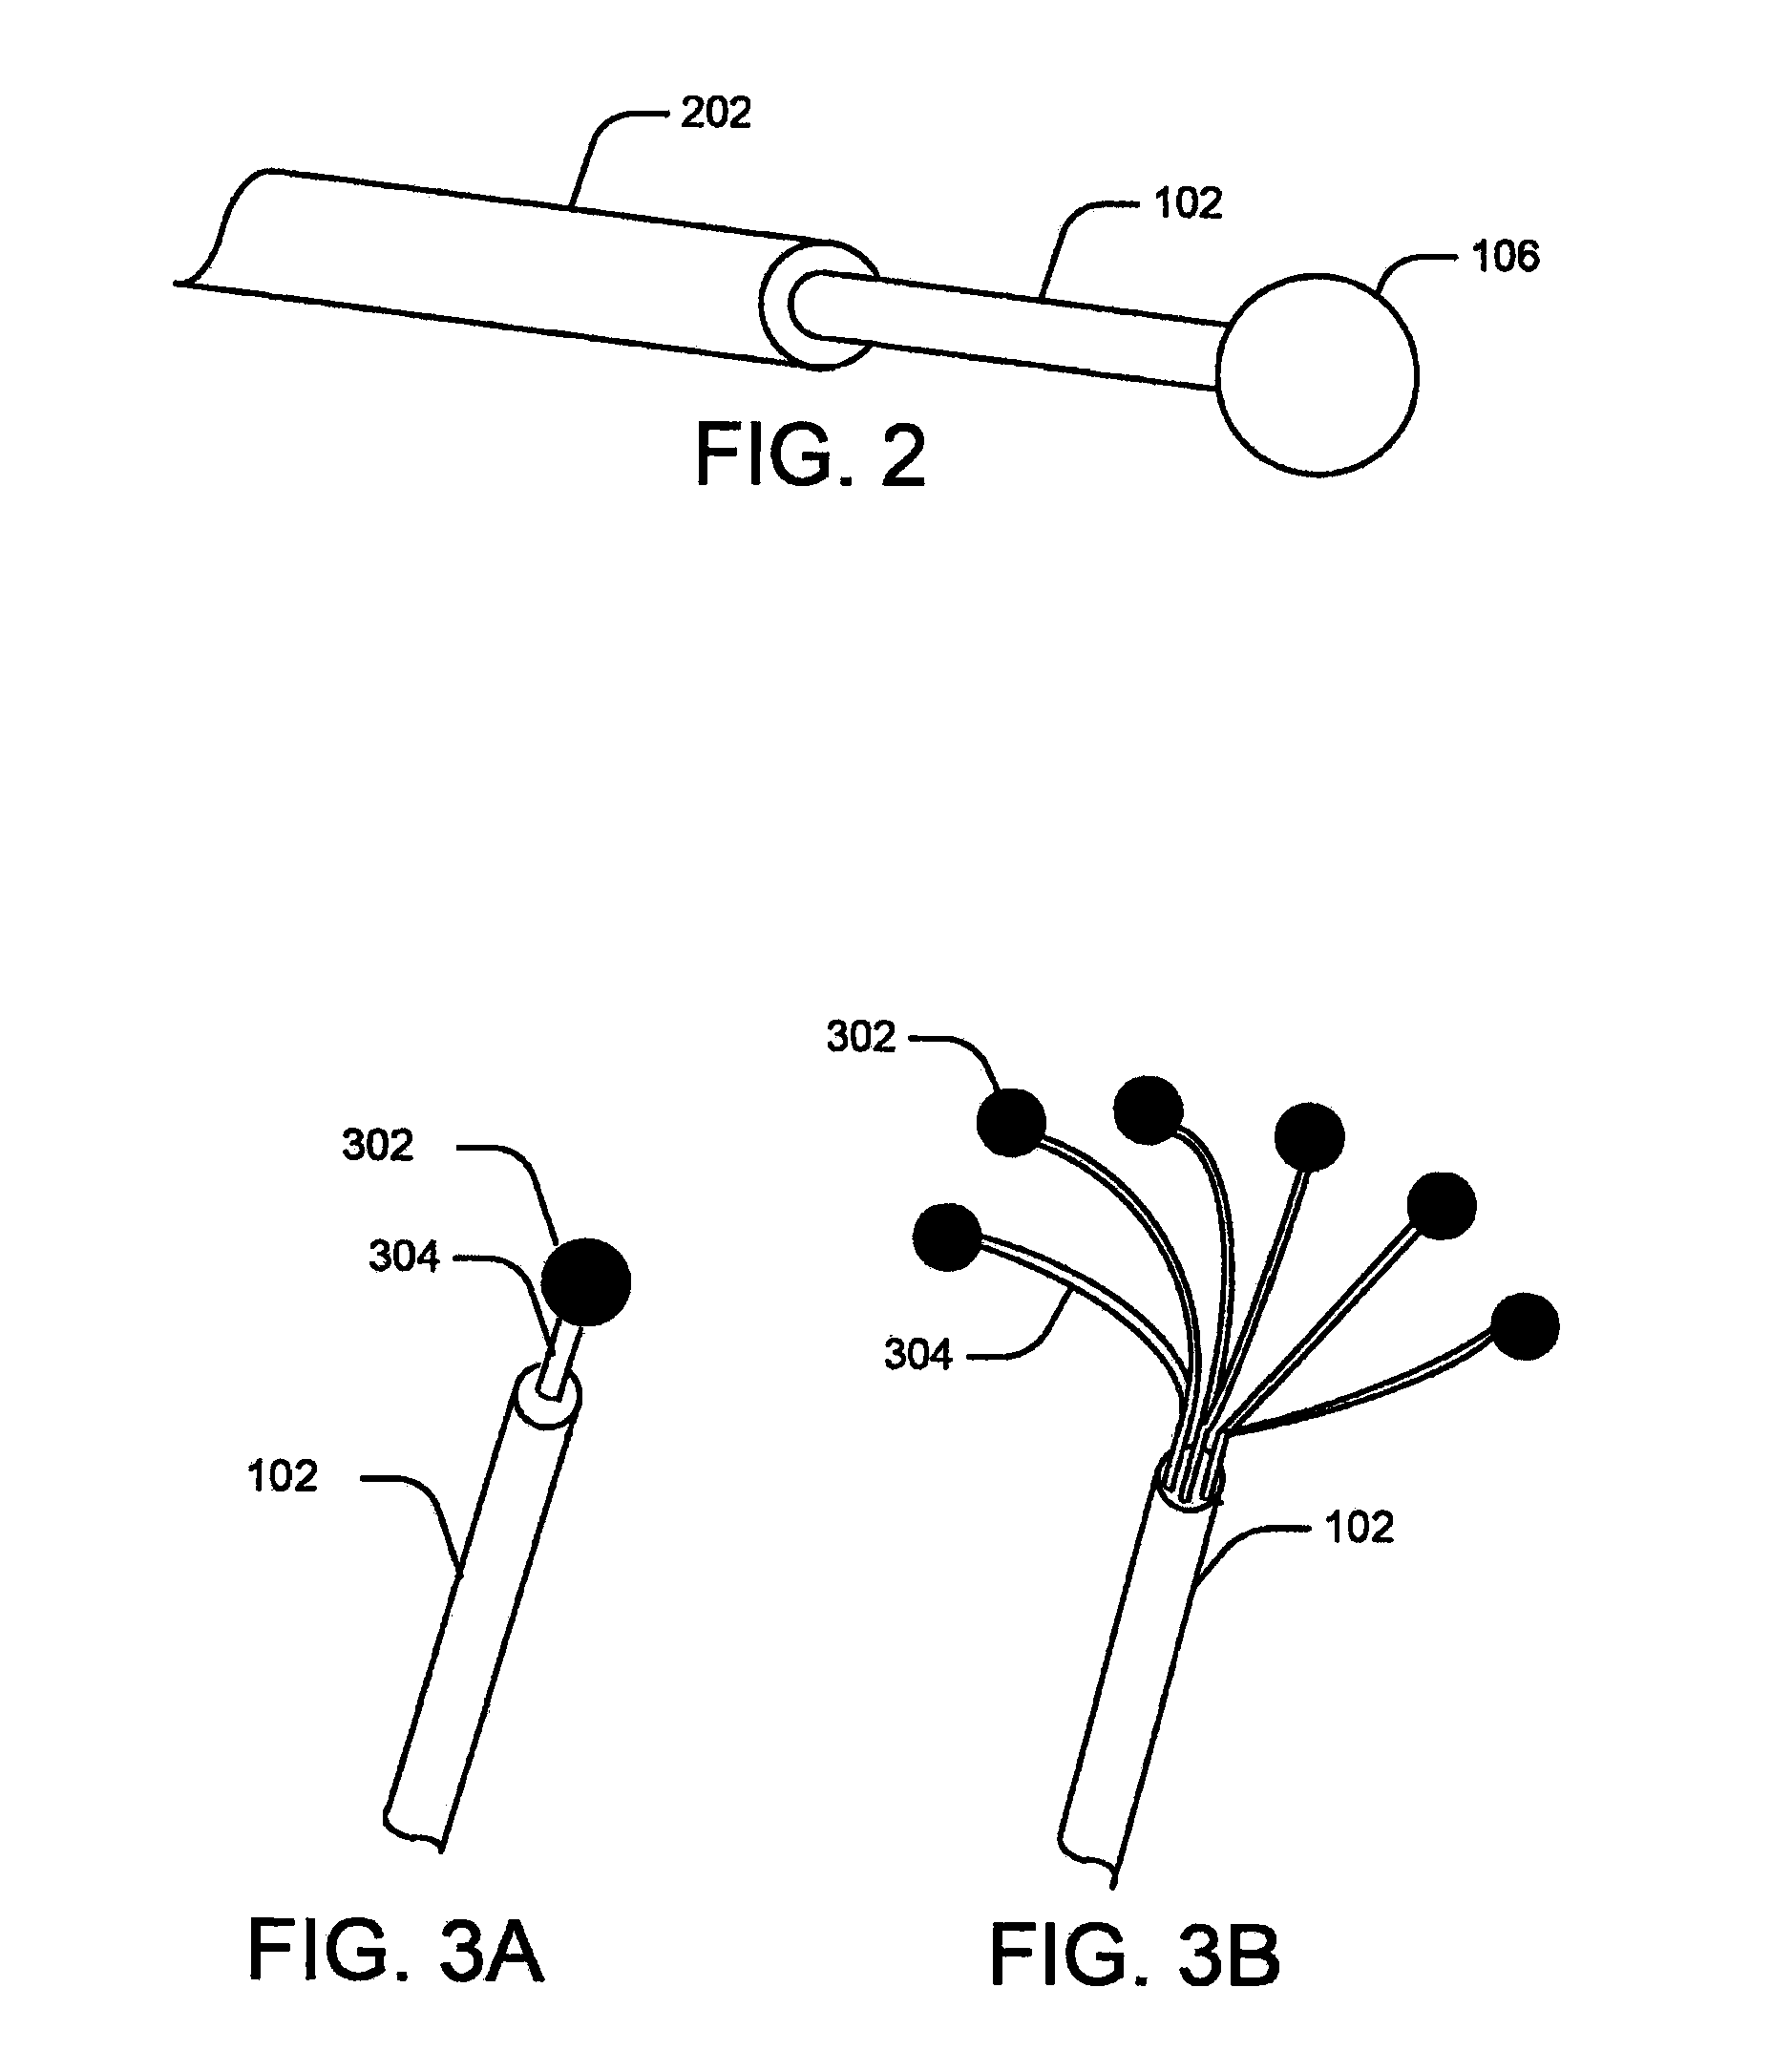 Systems and Methods for Monitoring Organ Activity